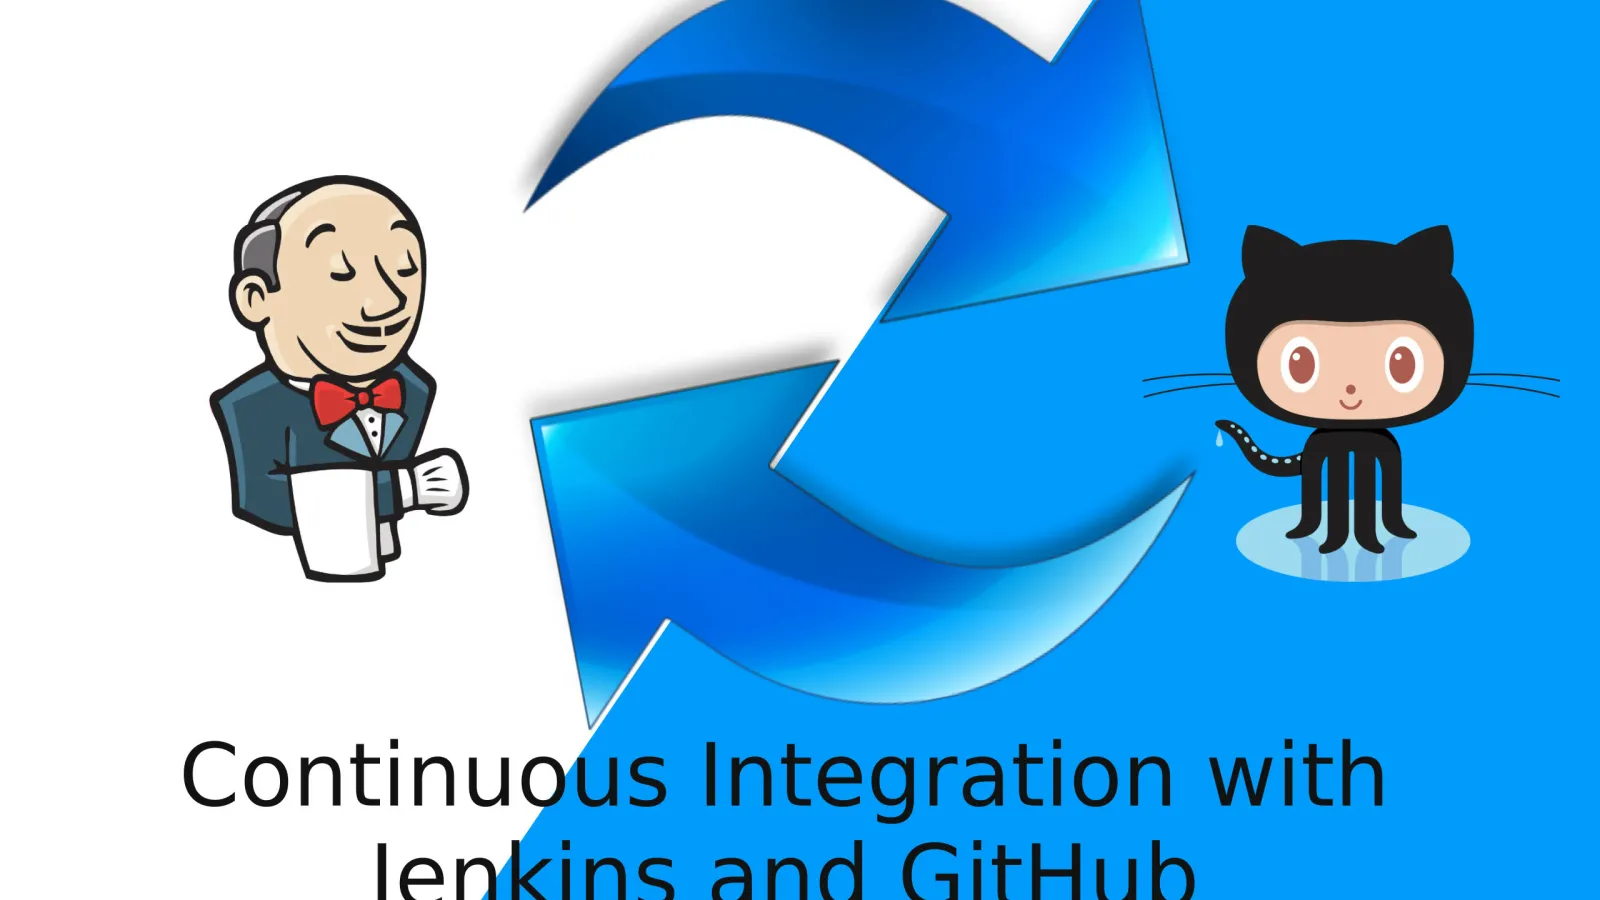 Continuous integration using Jenkins and GitHub